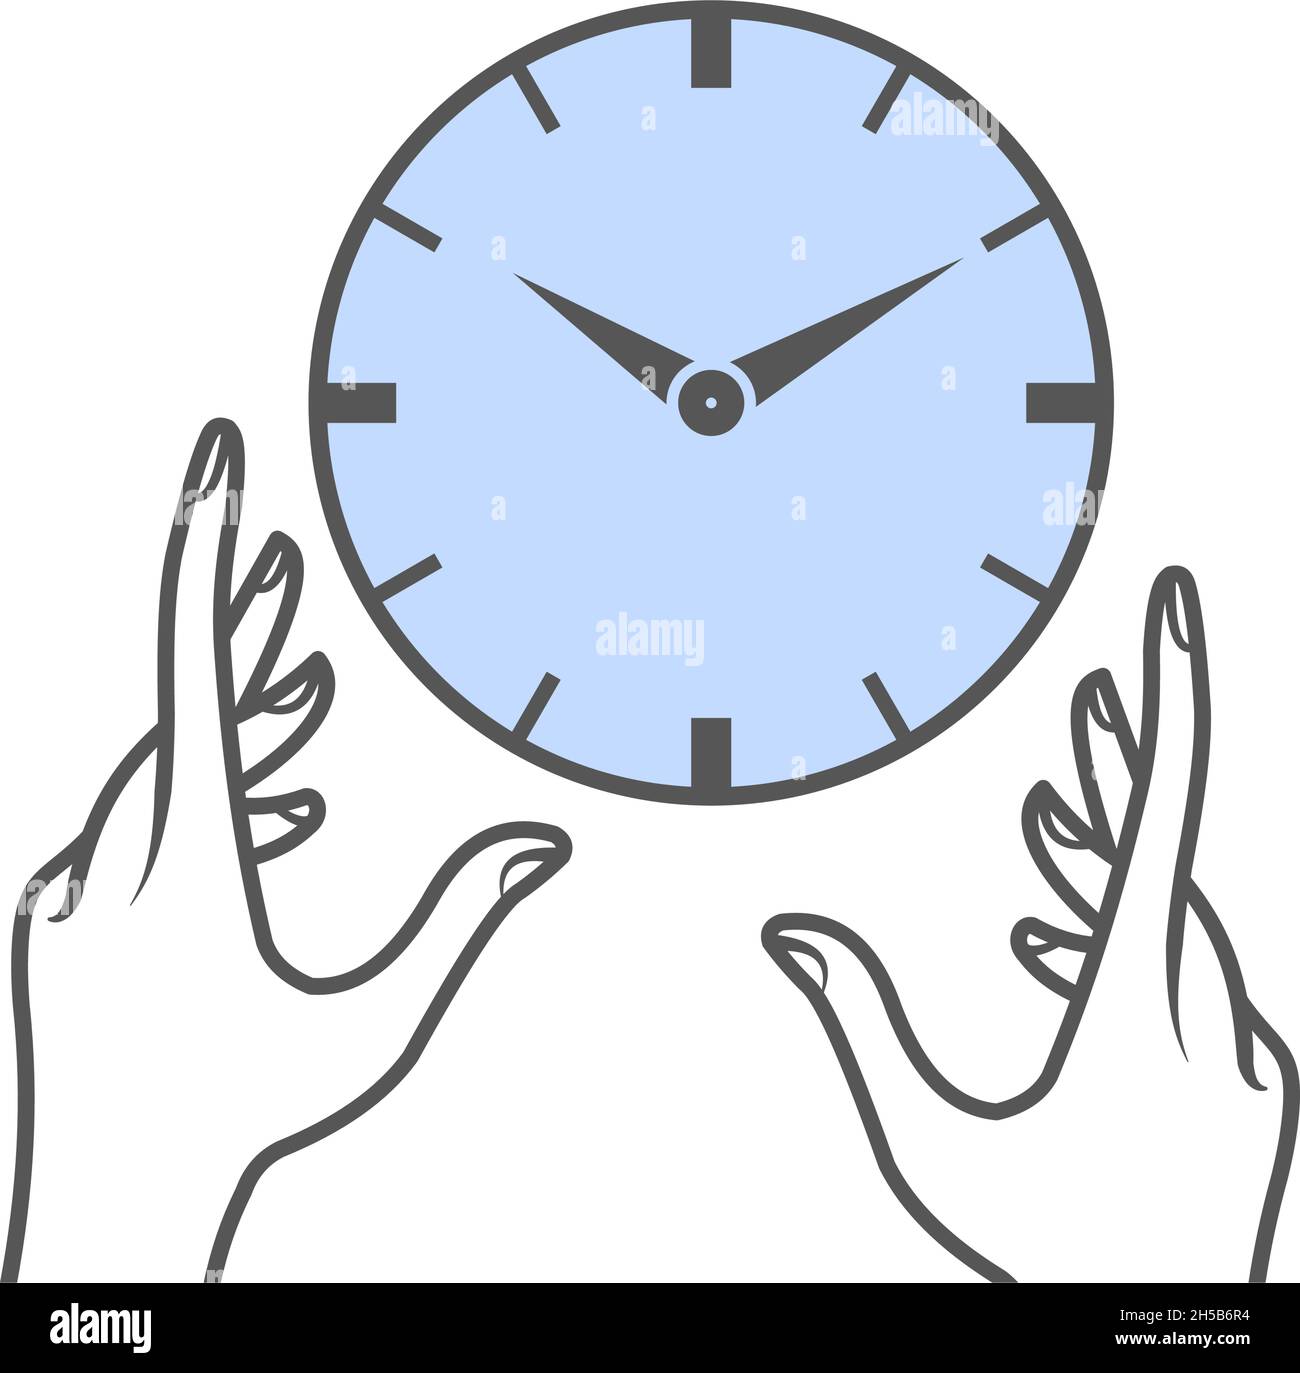 Hands trying to hold a clock. Time management concept. Flat style illustration. Isolated. Stock Vector